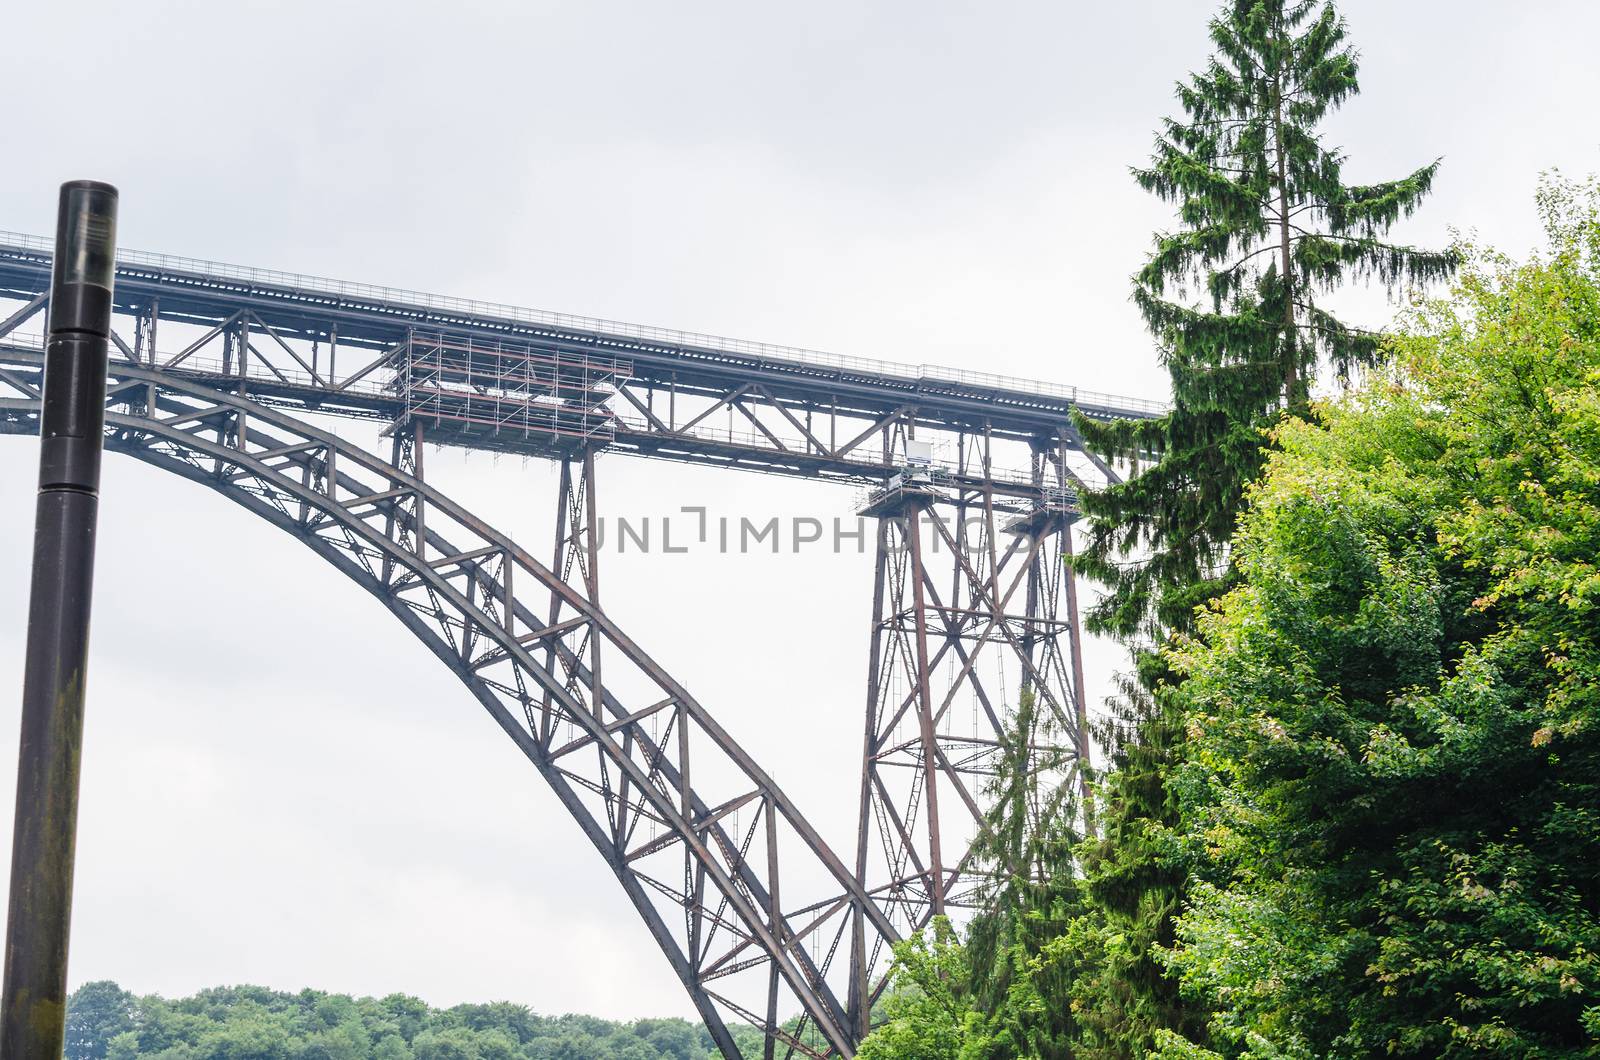 The Müngstener bridge is the highest railway bridge in Germany. Until 1918 it was called Kaiser Wilhelm Bridge.
Year of construction in 1894 and has a height of 107 m and a total length of 465 m.
